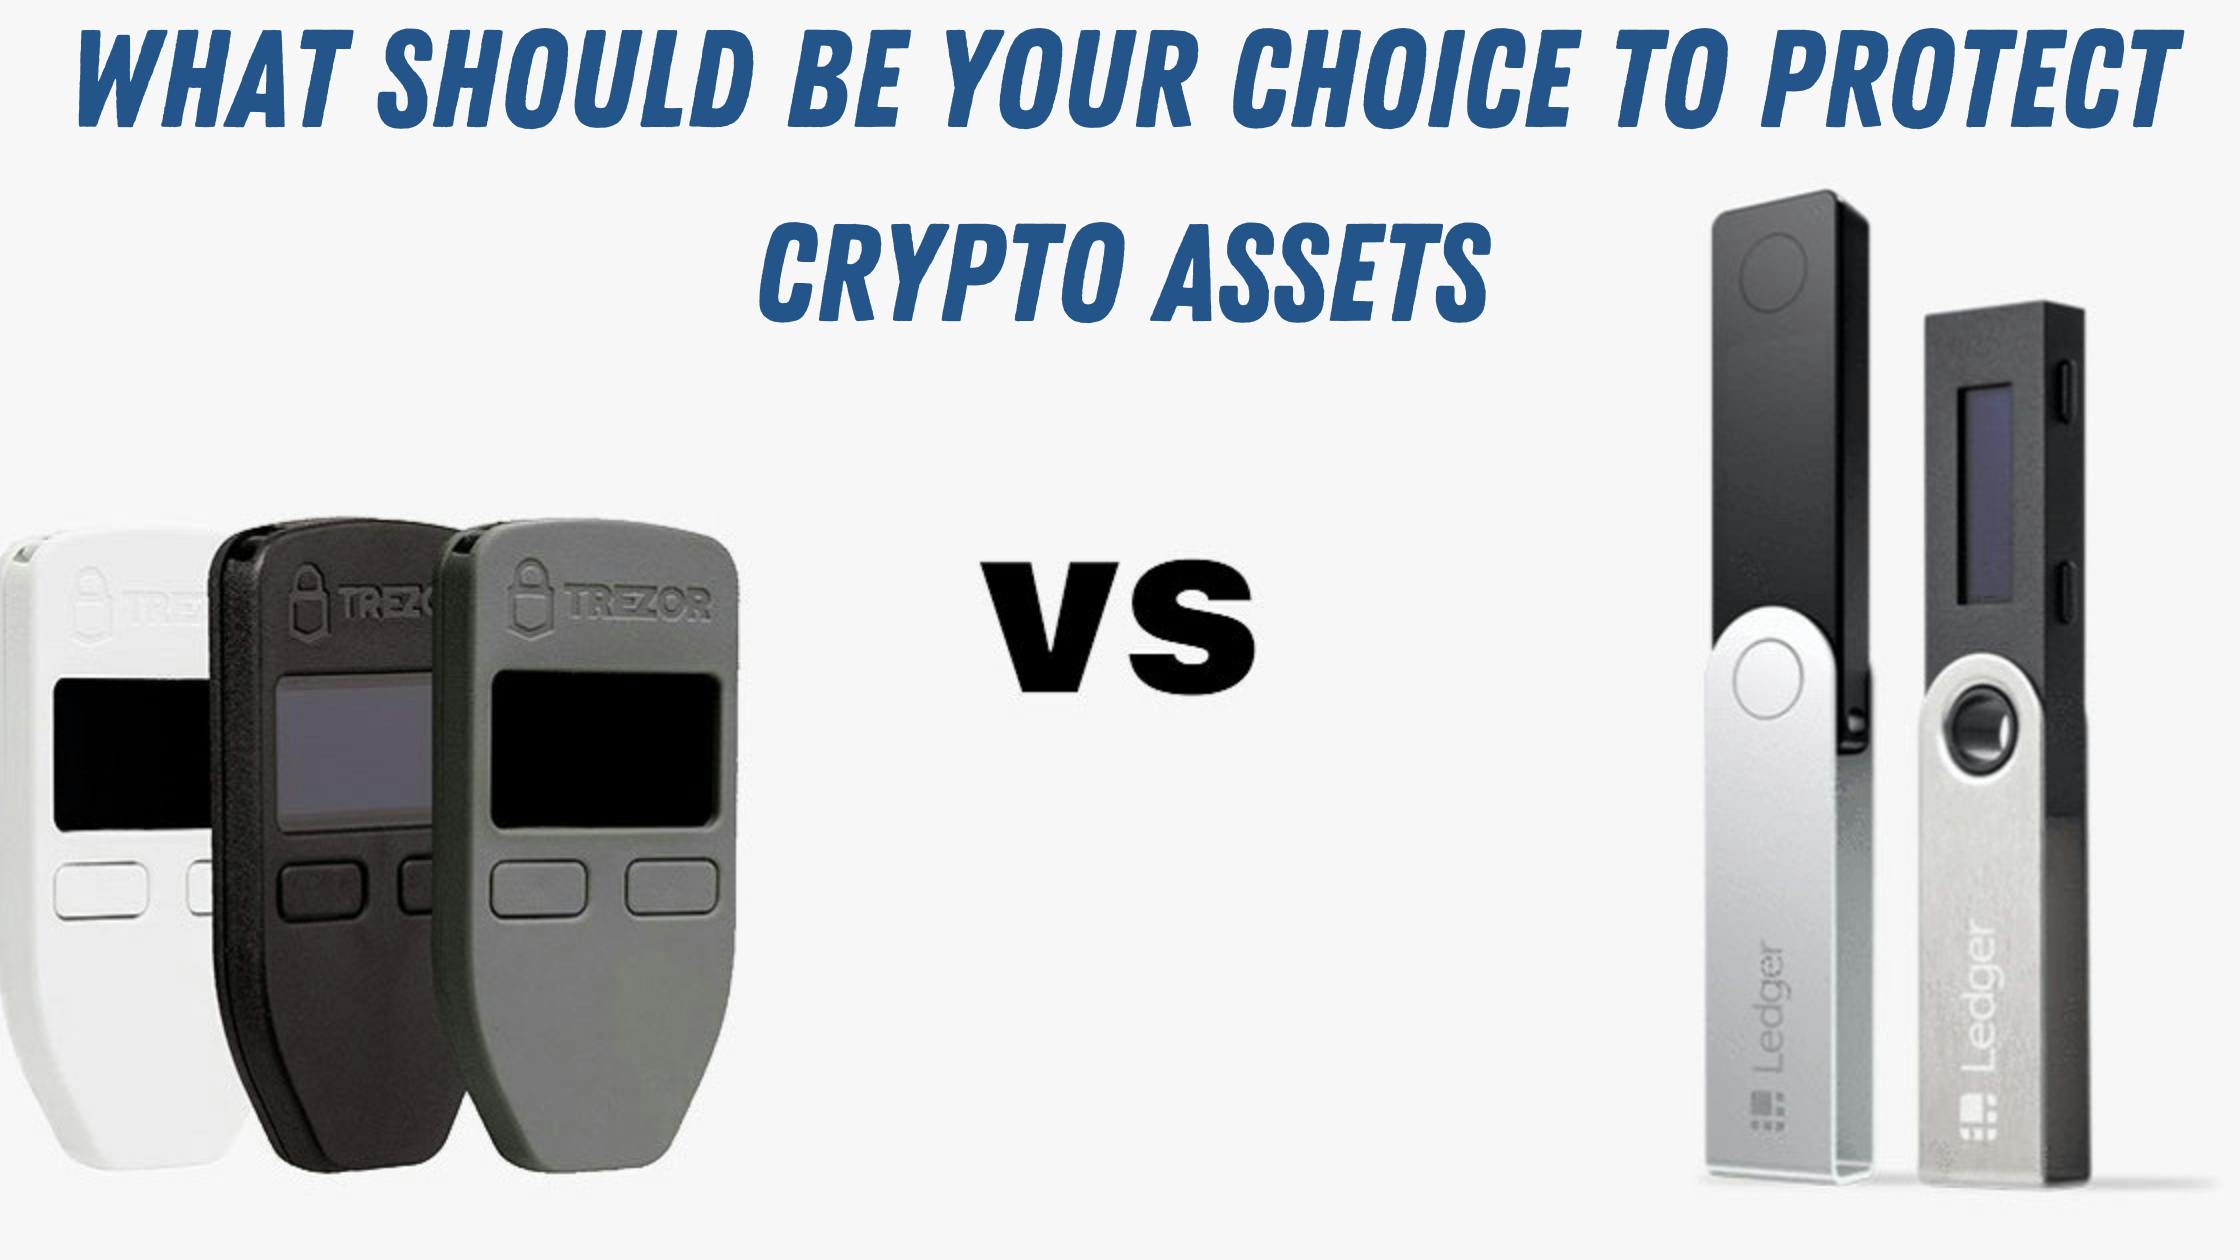 Trezor Vs Ledger: What Should Be Your Choice to Protect Crypto Assets